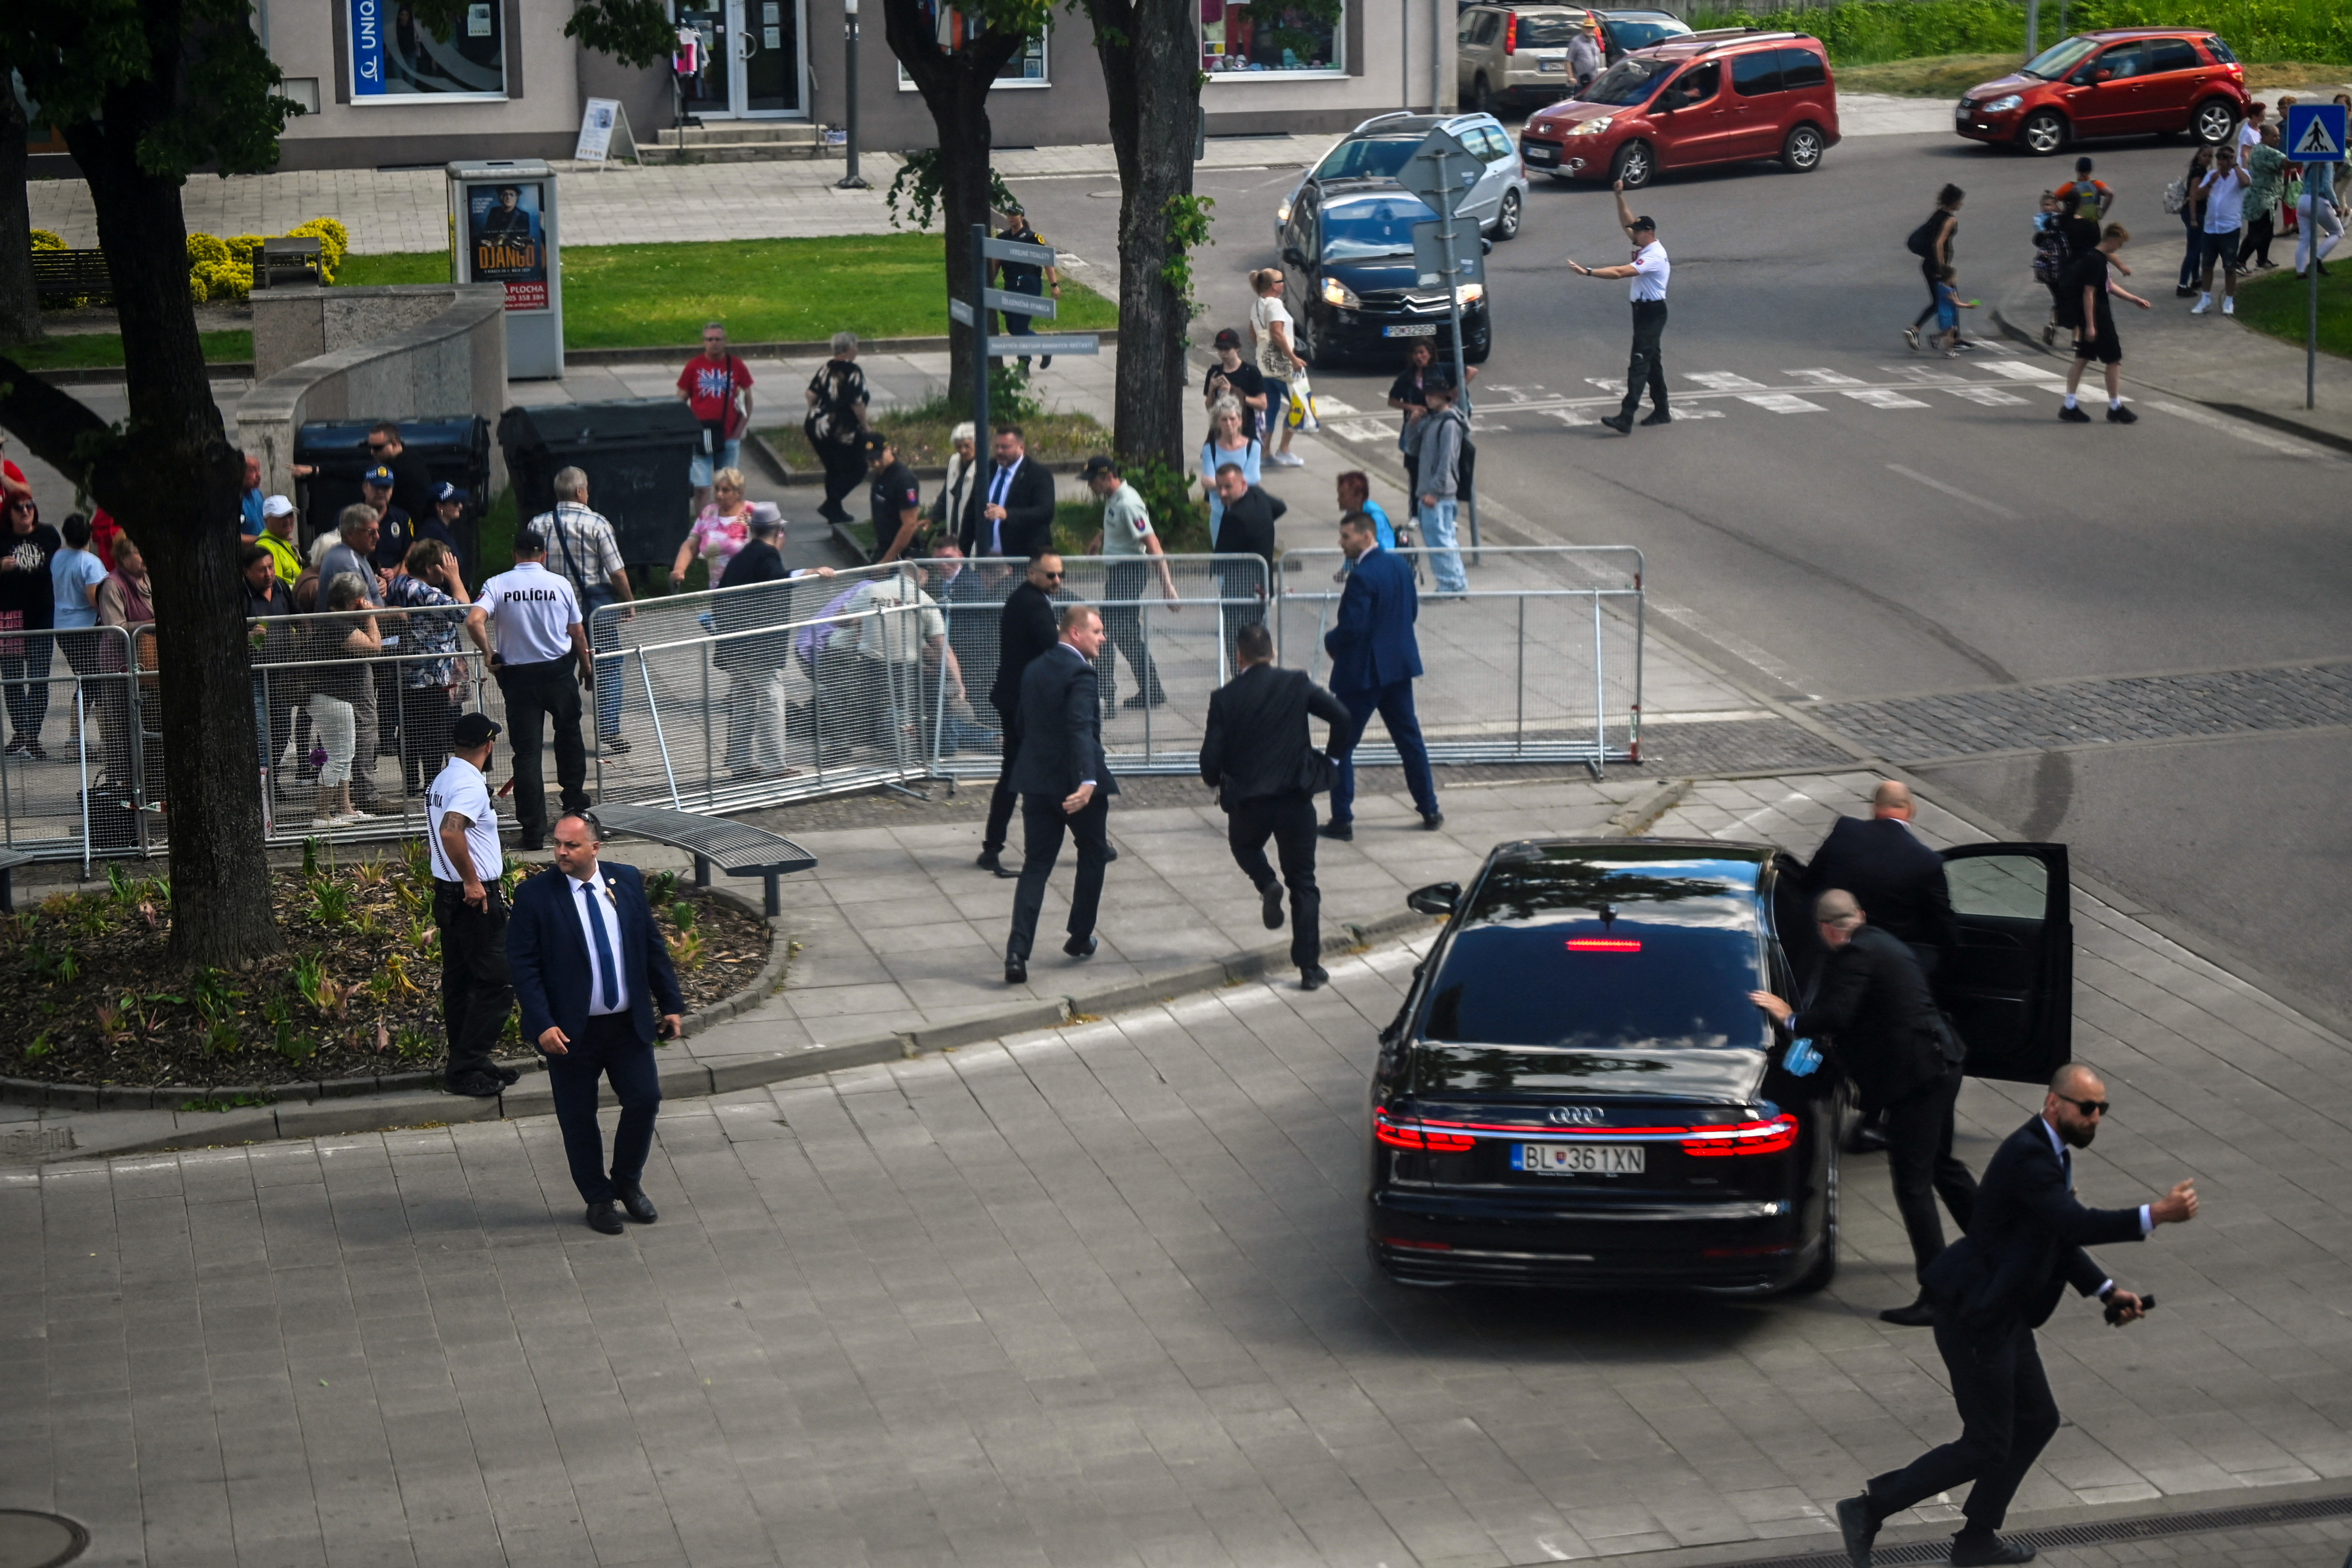 A picture and its story: The Slovak assassination attempt photo that nearly got away